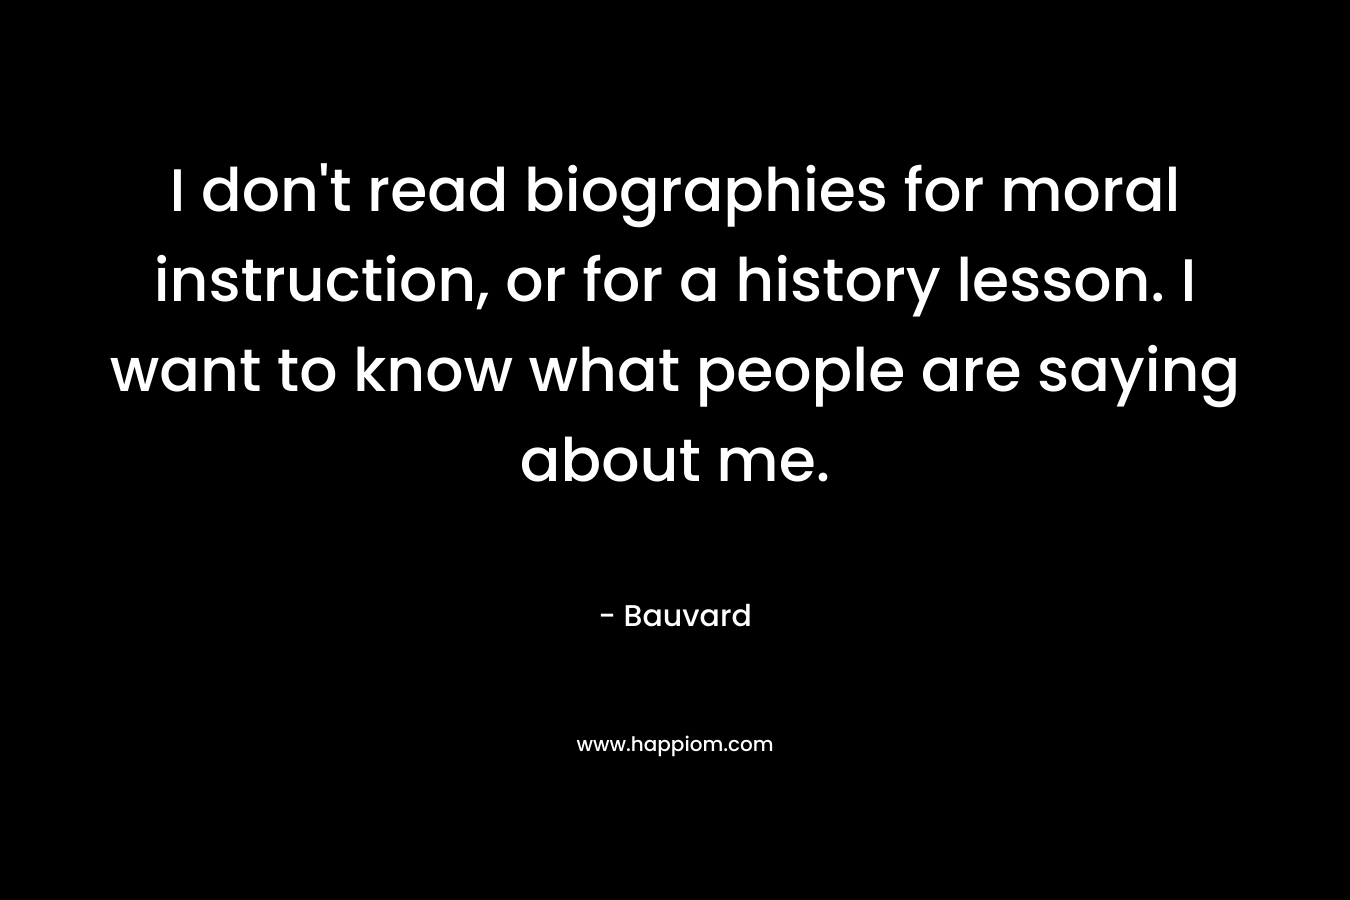 I don't read biographies for moral instruction, or for a history lesson. I want to know what people are saying about me.